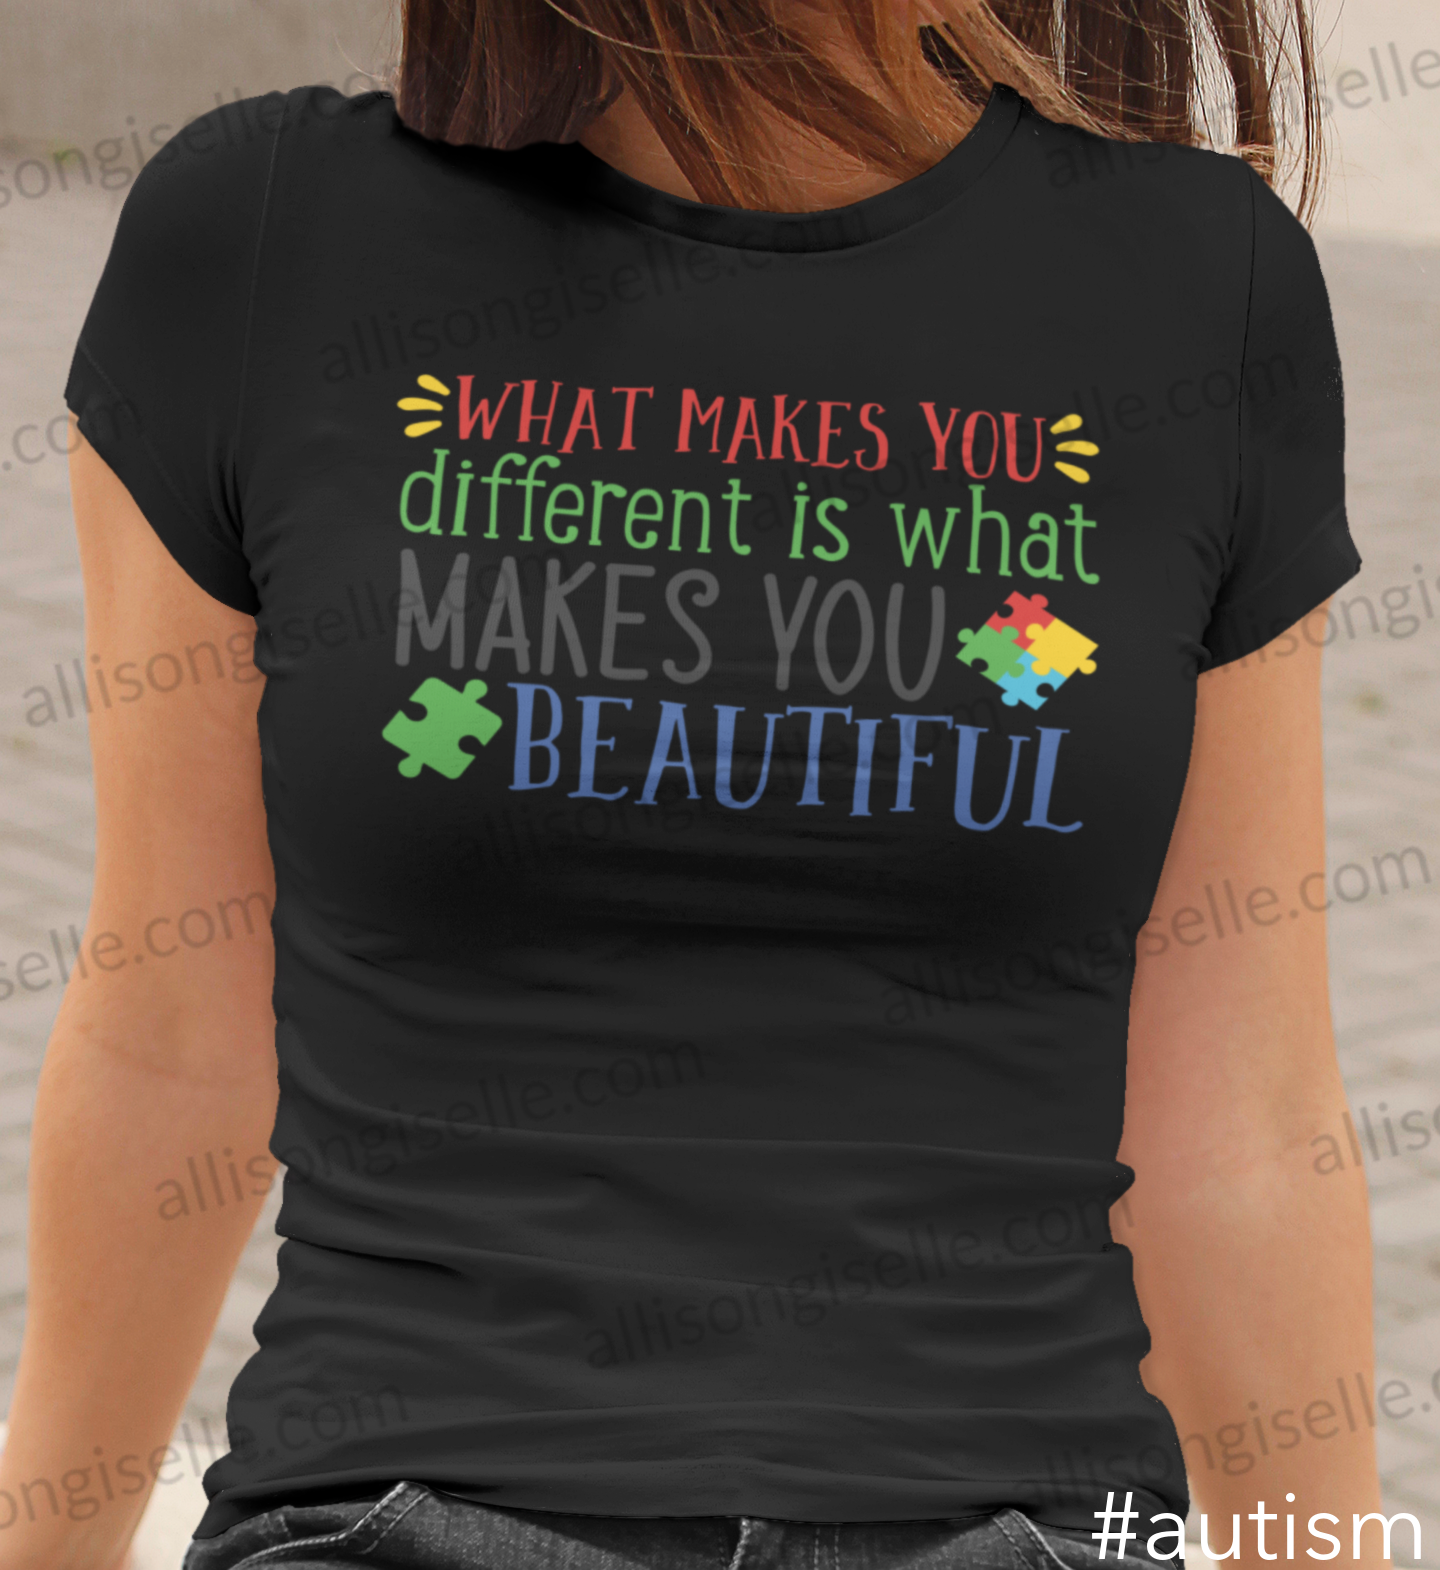 What Makes You Different Is What Makes You Beautiful Autism Shirt, Autism Shirt Adult, Autism Awareness Shirt Adult